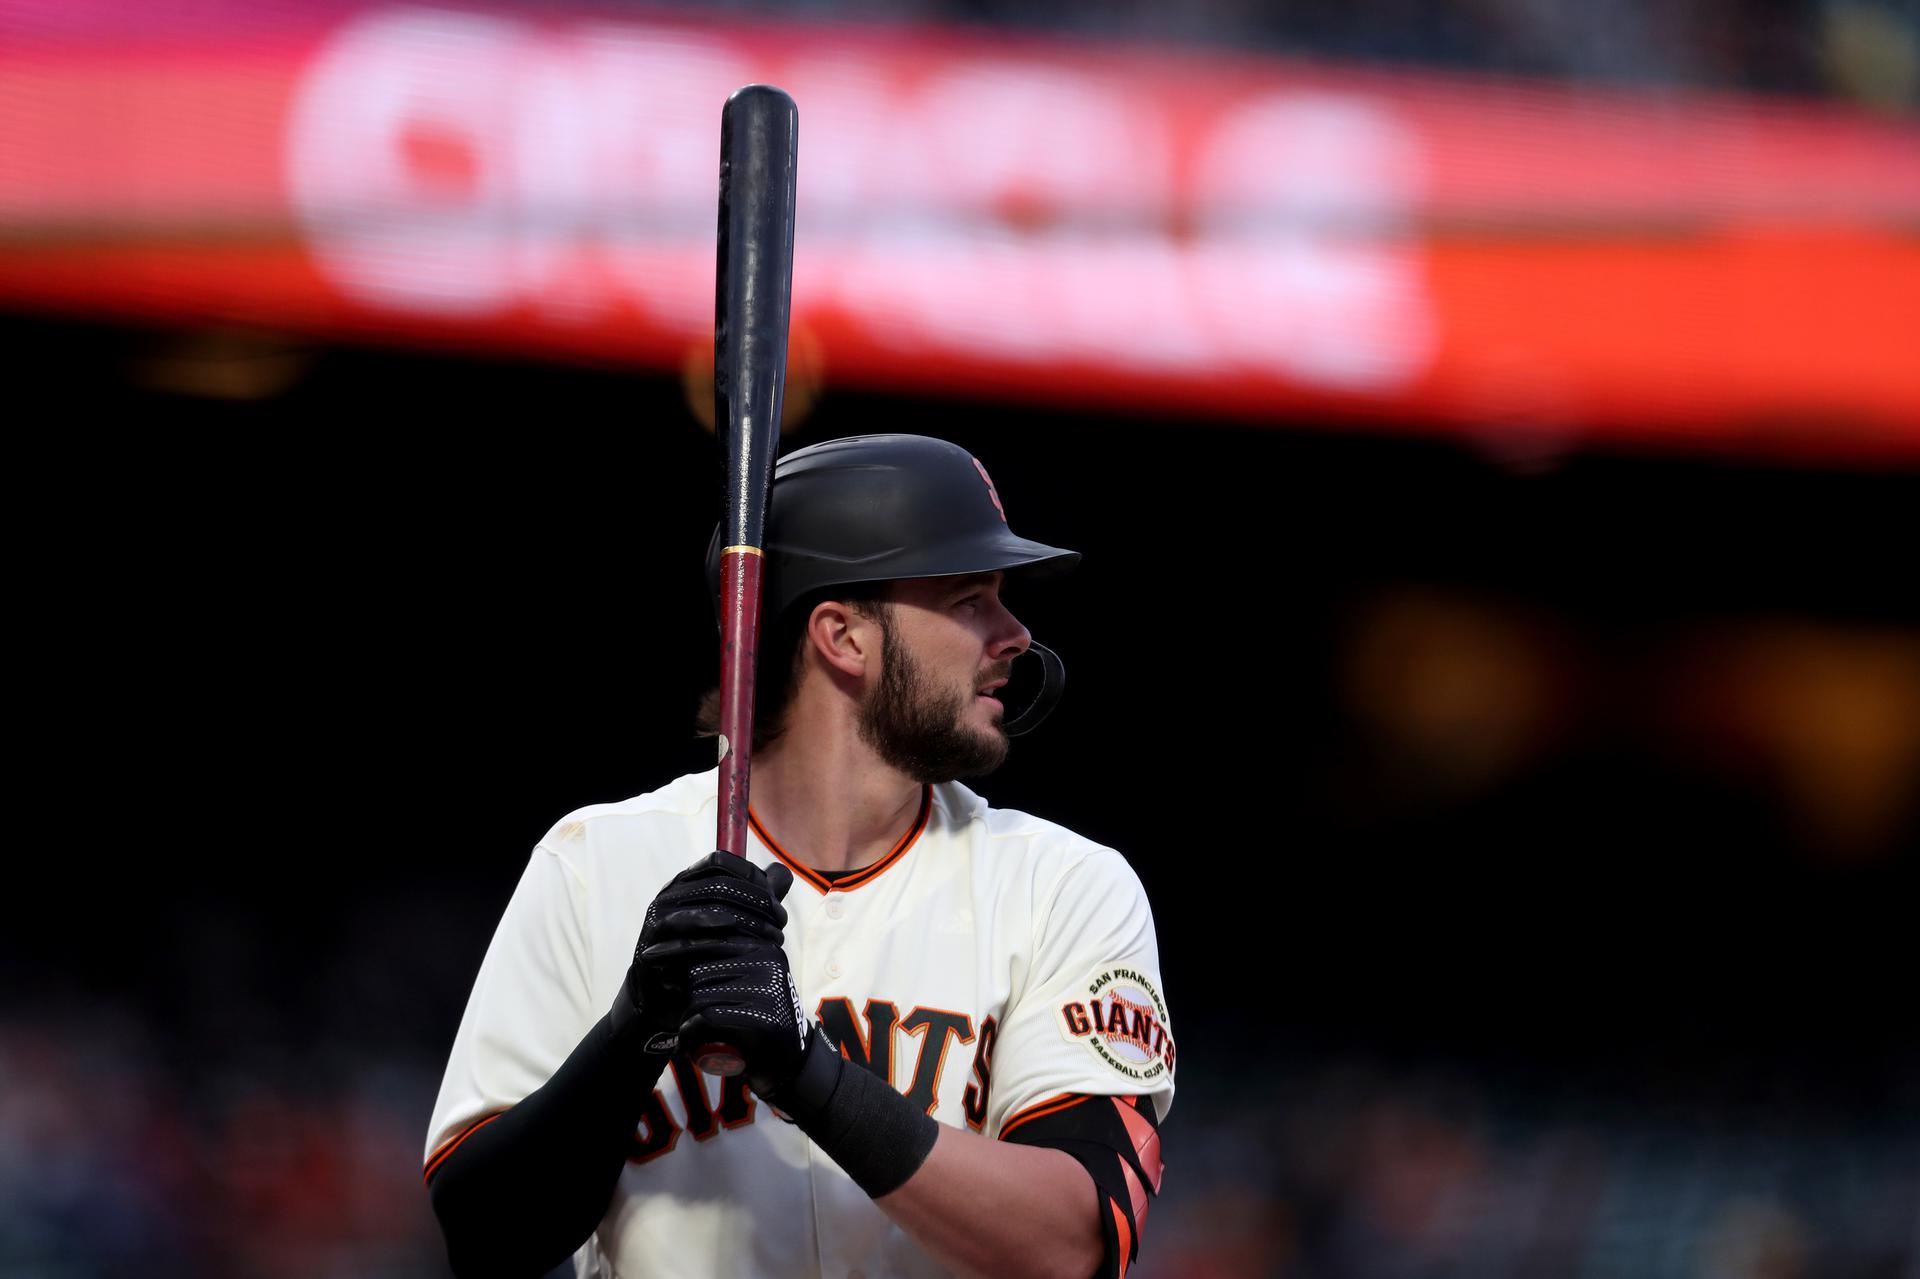 San Francisco Giants may have more than rental in Kris Bryant